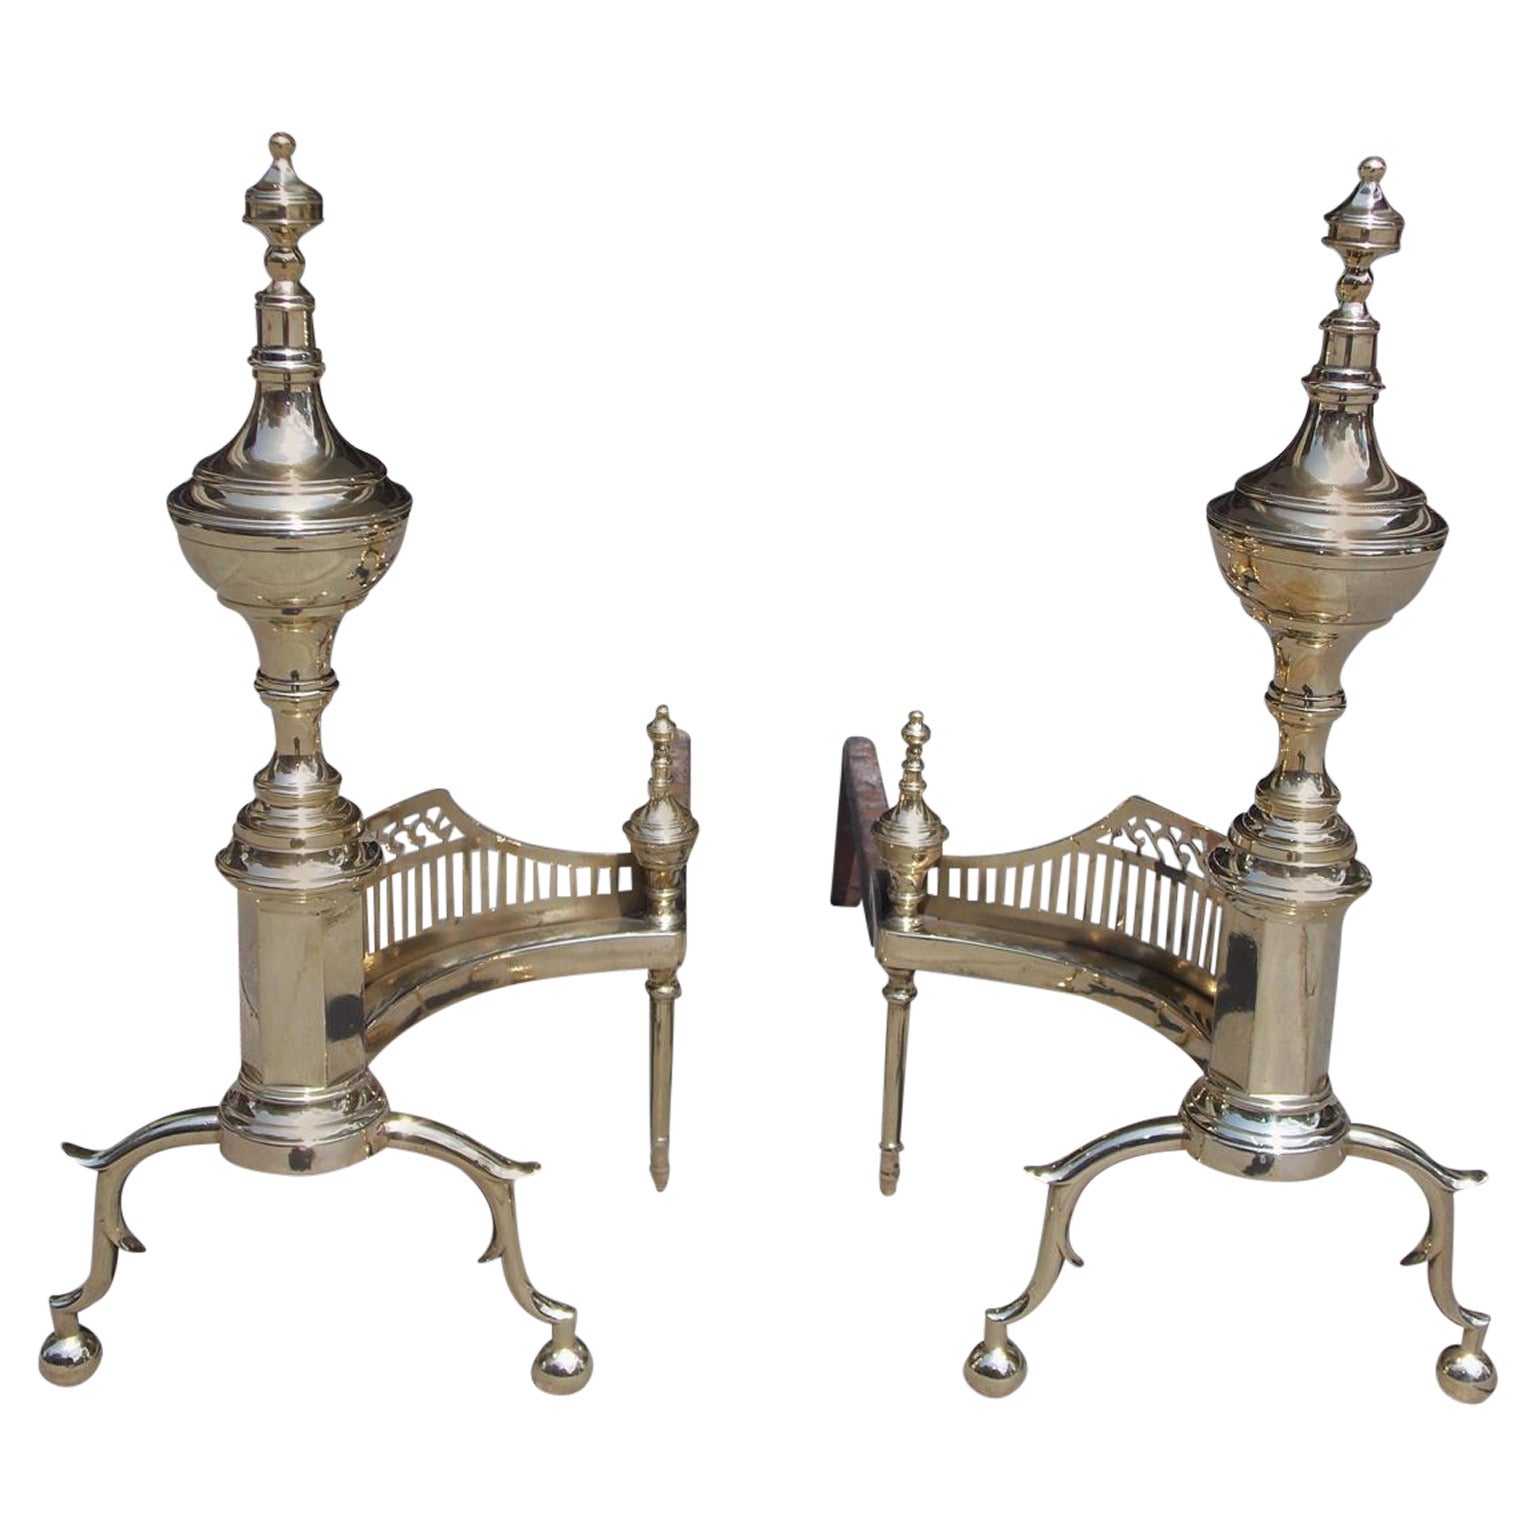 Pair of American Brass Urn Finial & Gallery Andirons. NY, Circa 1815, Wittingham For Sale